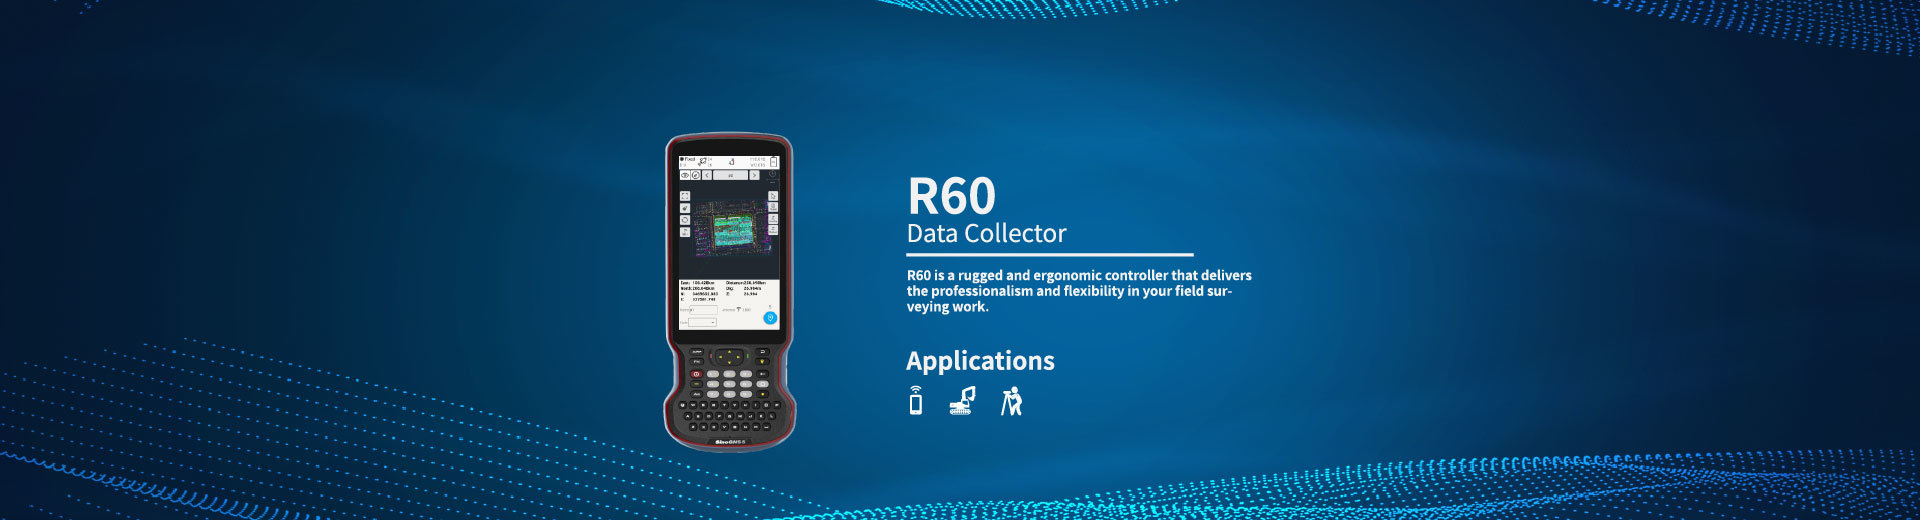 R60 Data Collector